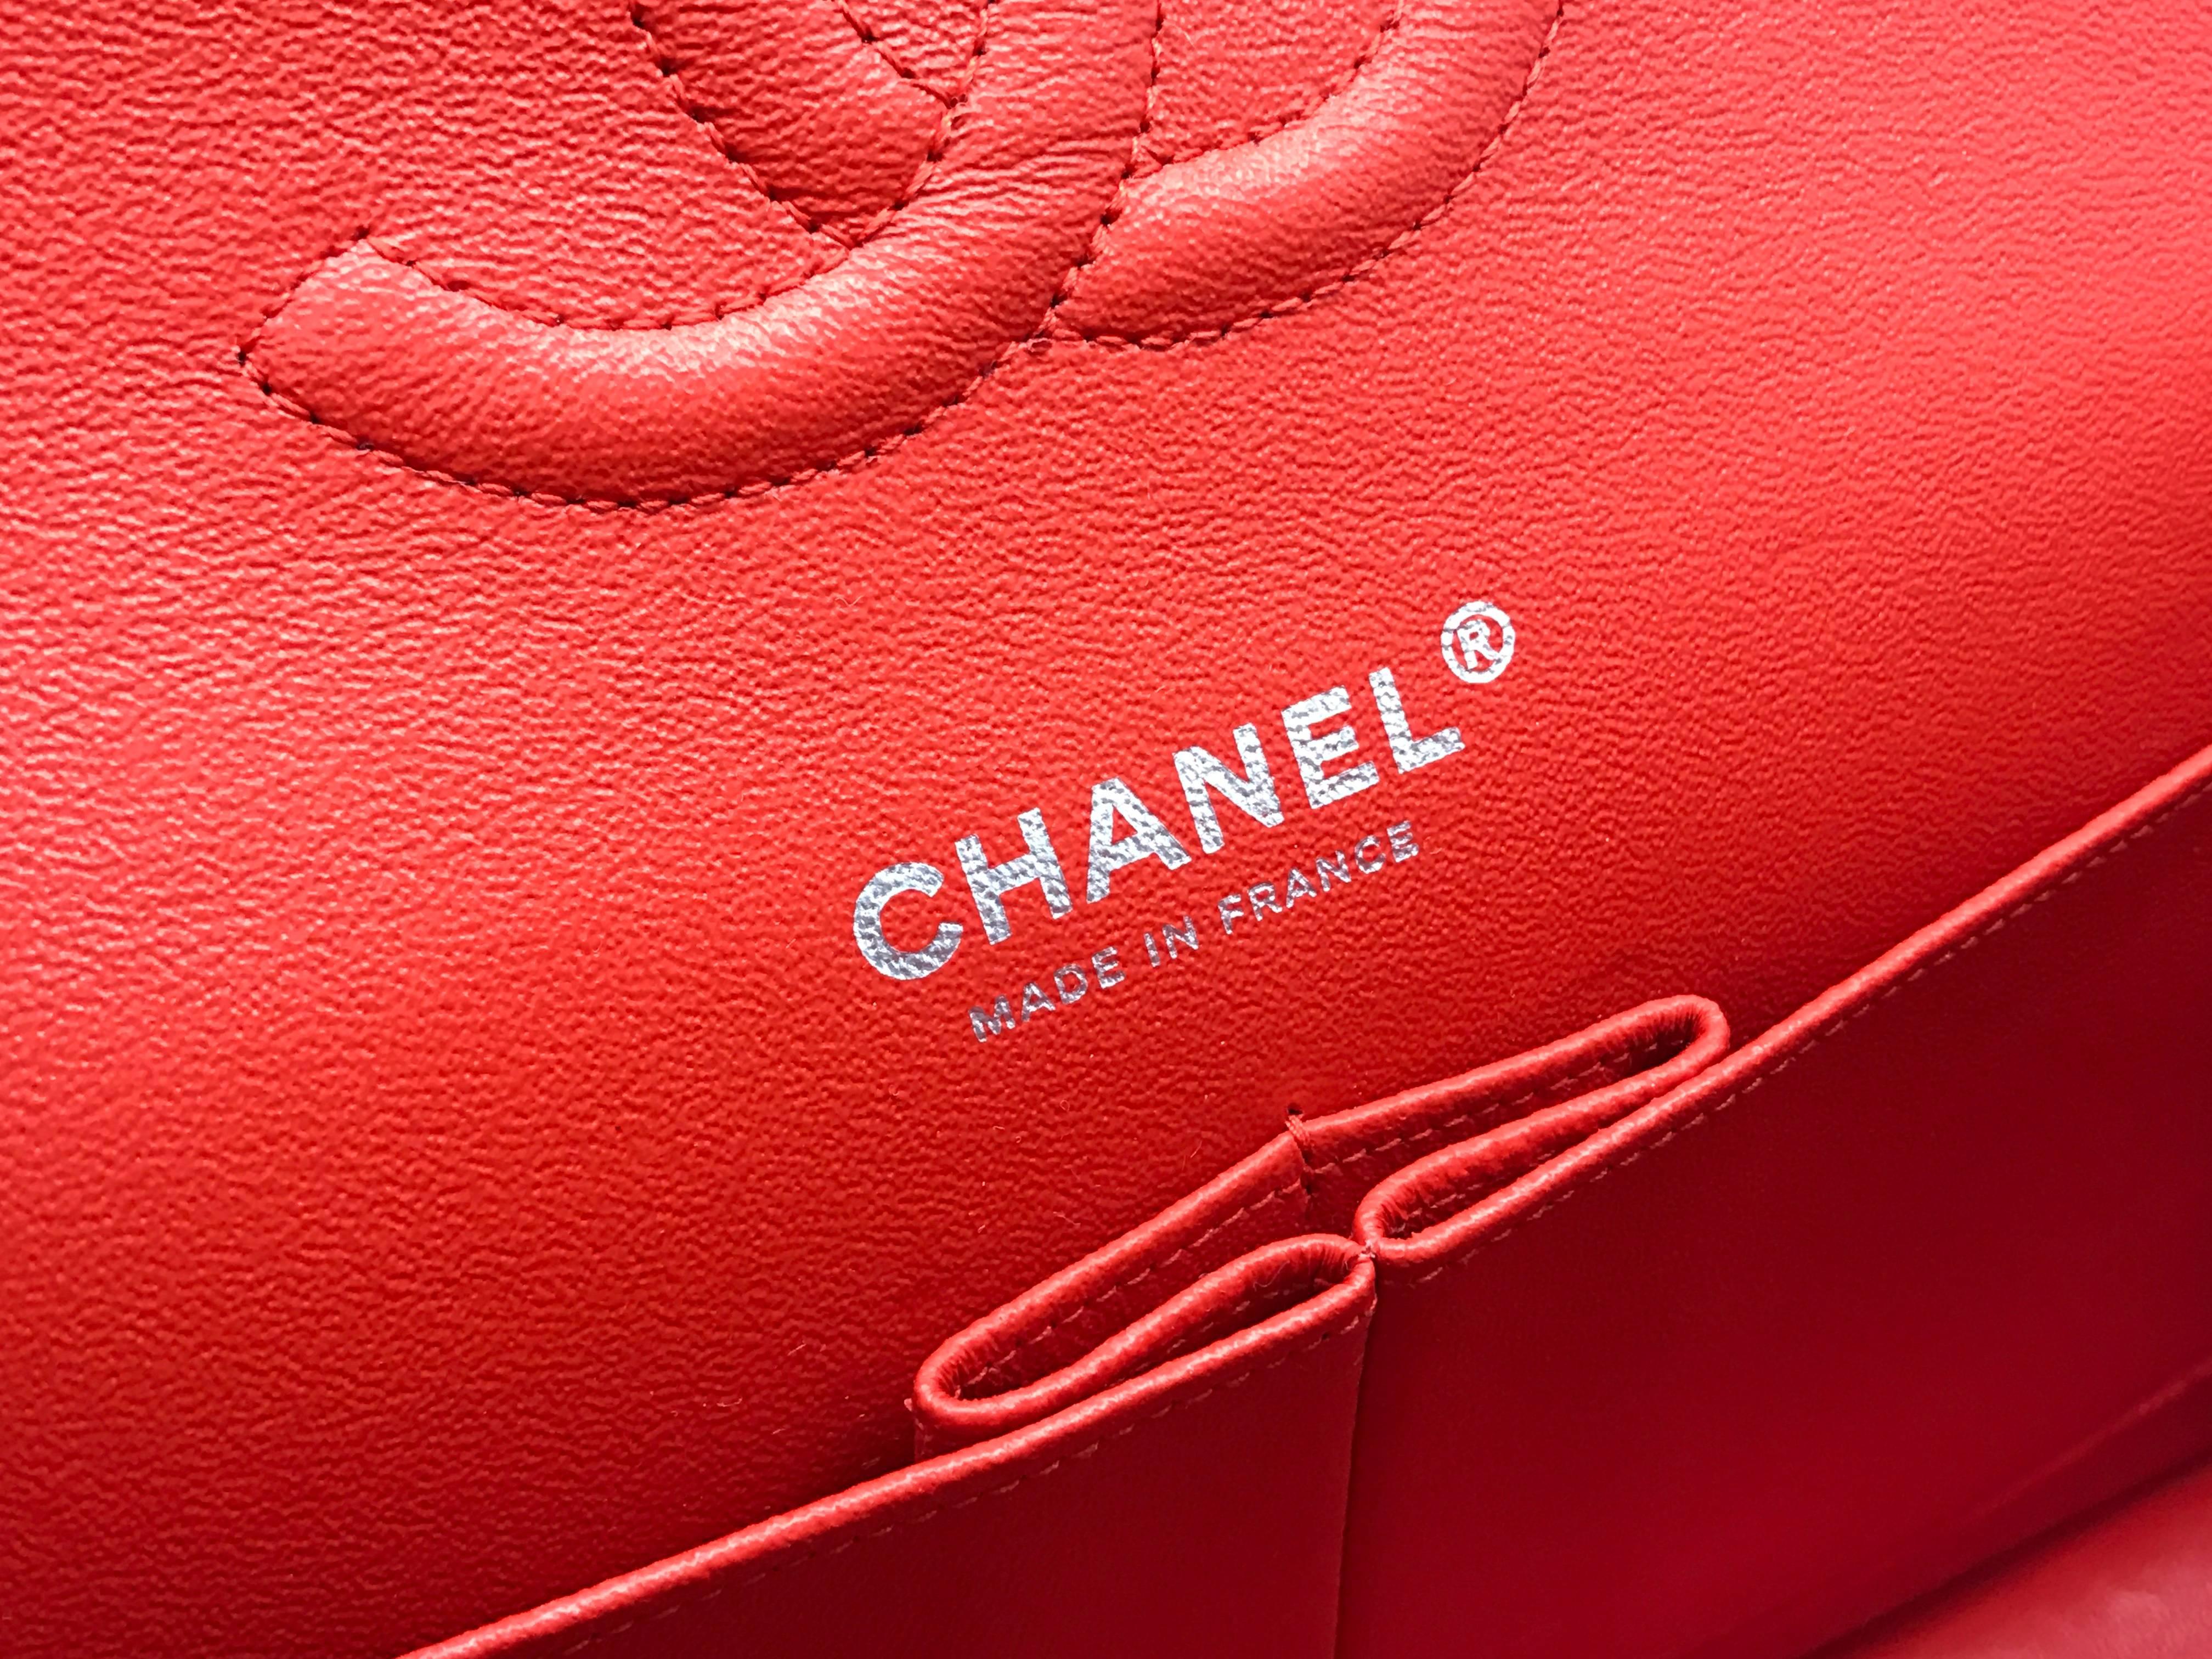 Chanel Red Patent Leather SHW Chain Shoulder Bag For Sale 3